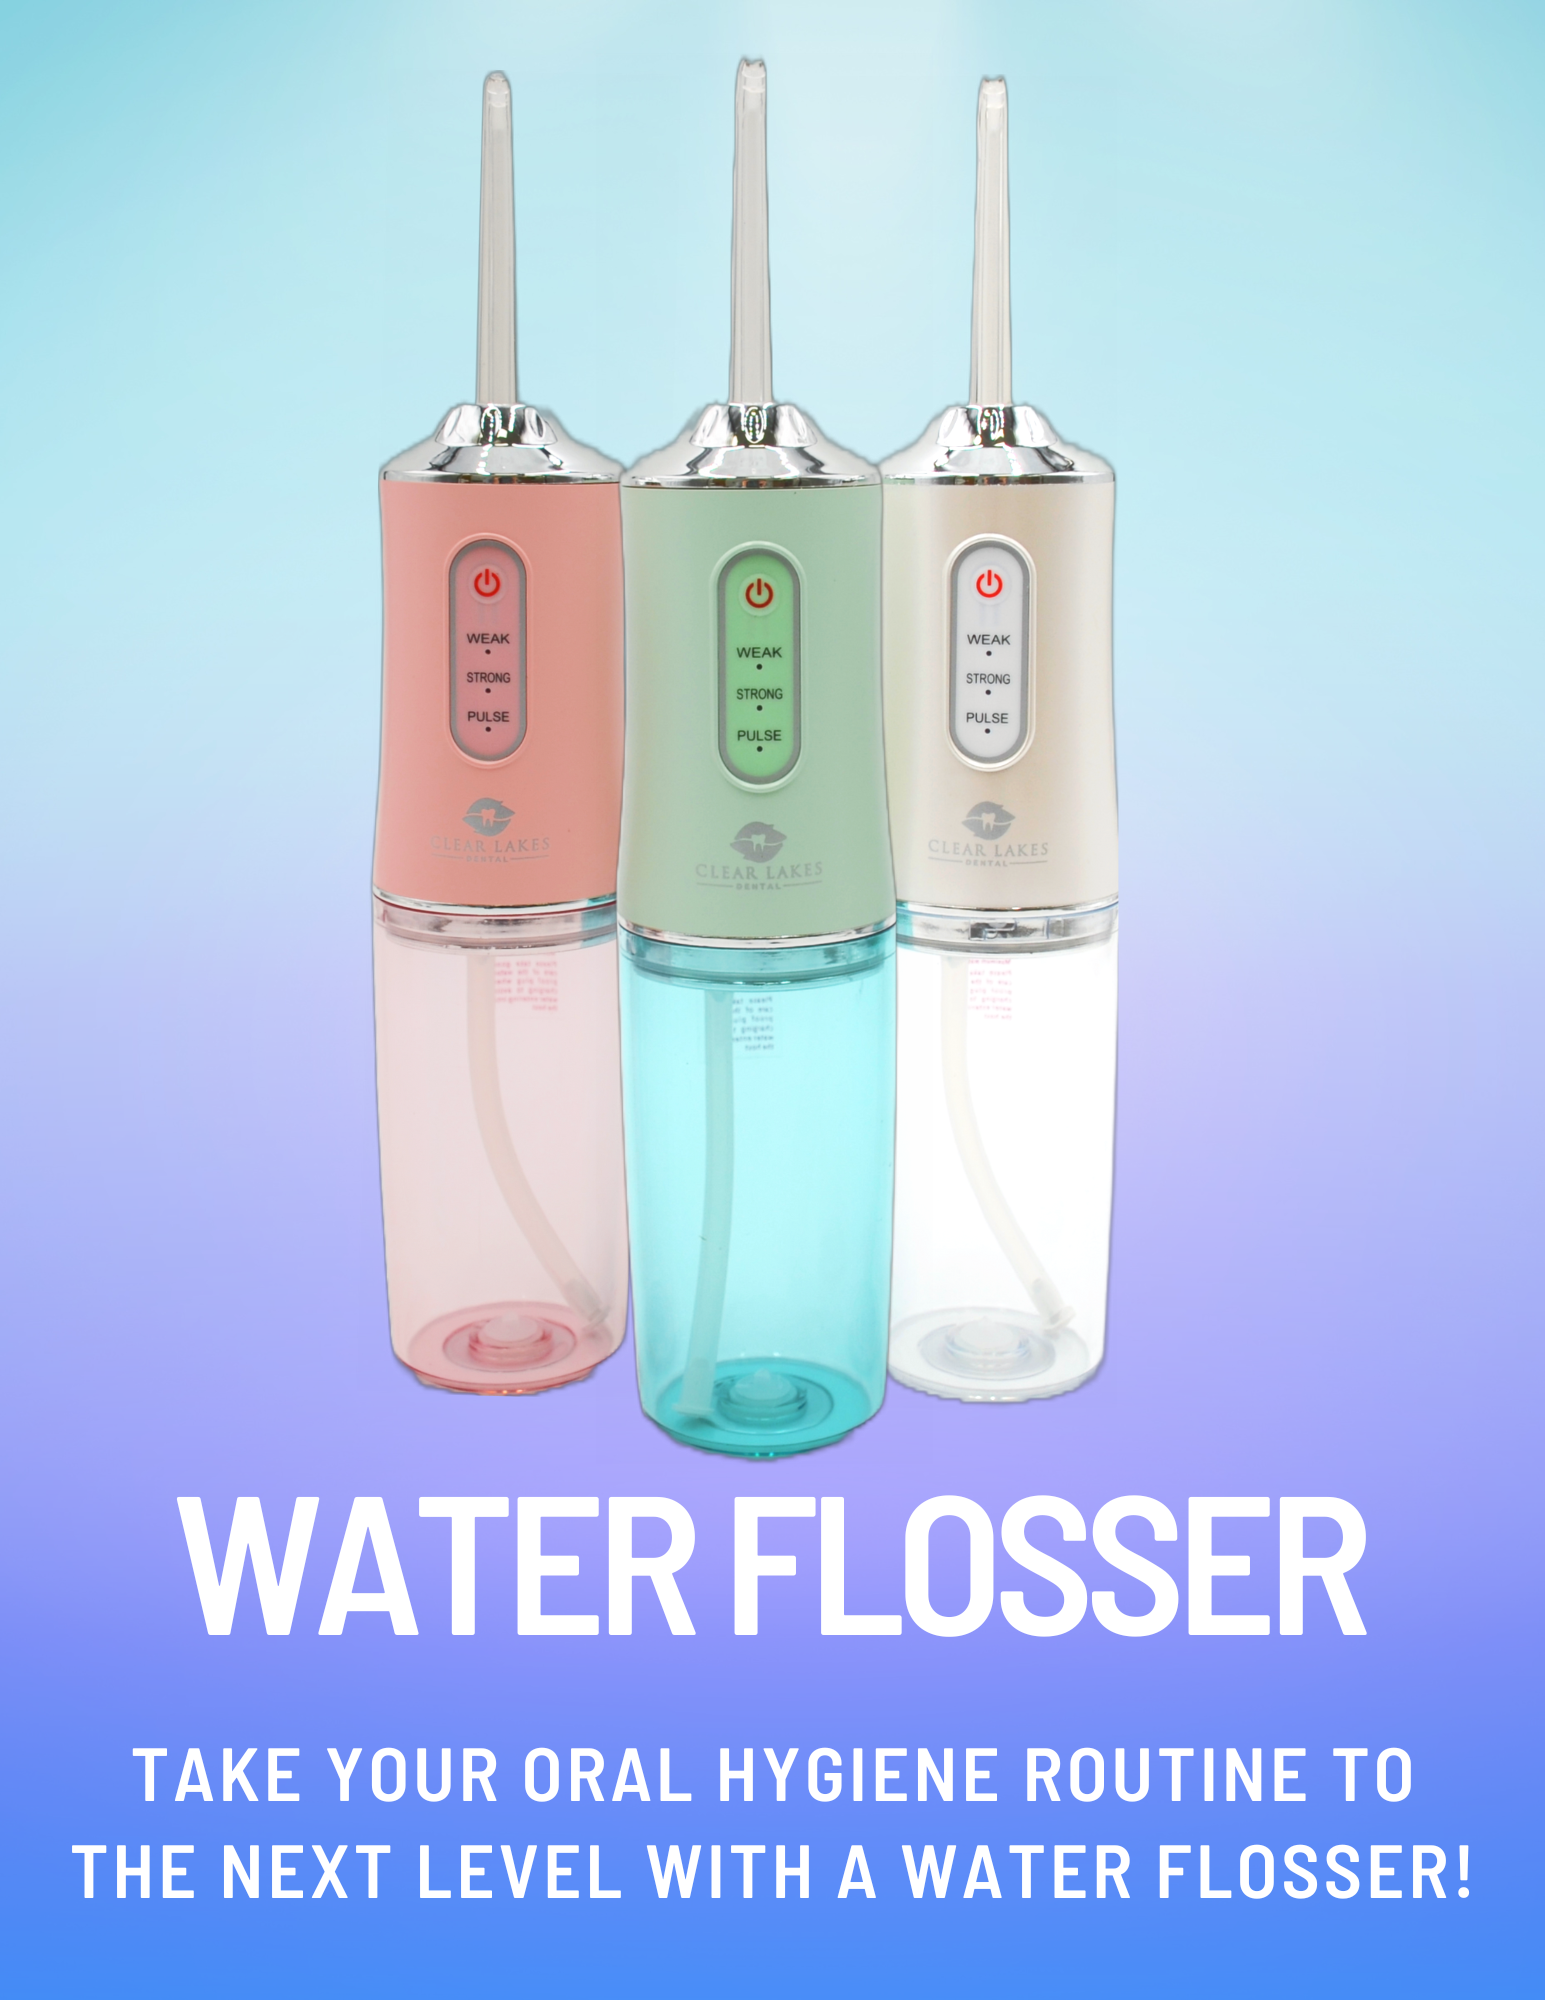 3 Water Flossers on a blue and purple background with the text "Water Flossers- Take Your Oral Hygiene Routine to the Next Level with a Water Flosser!"